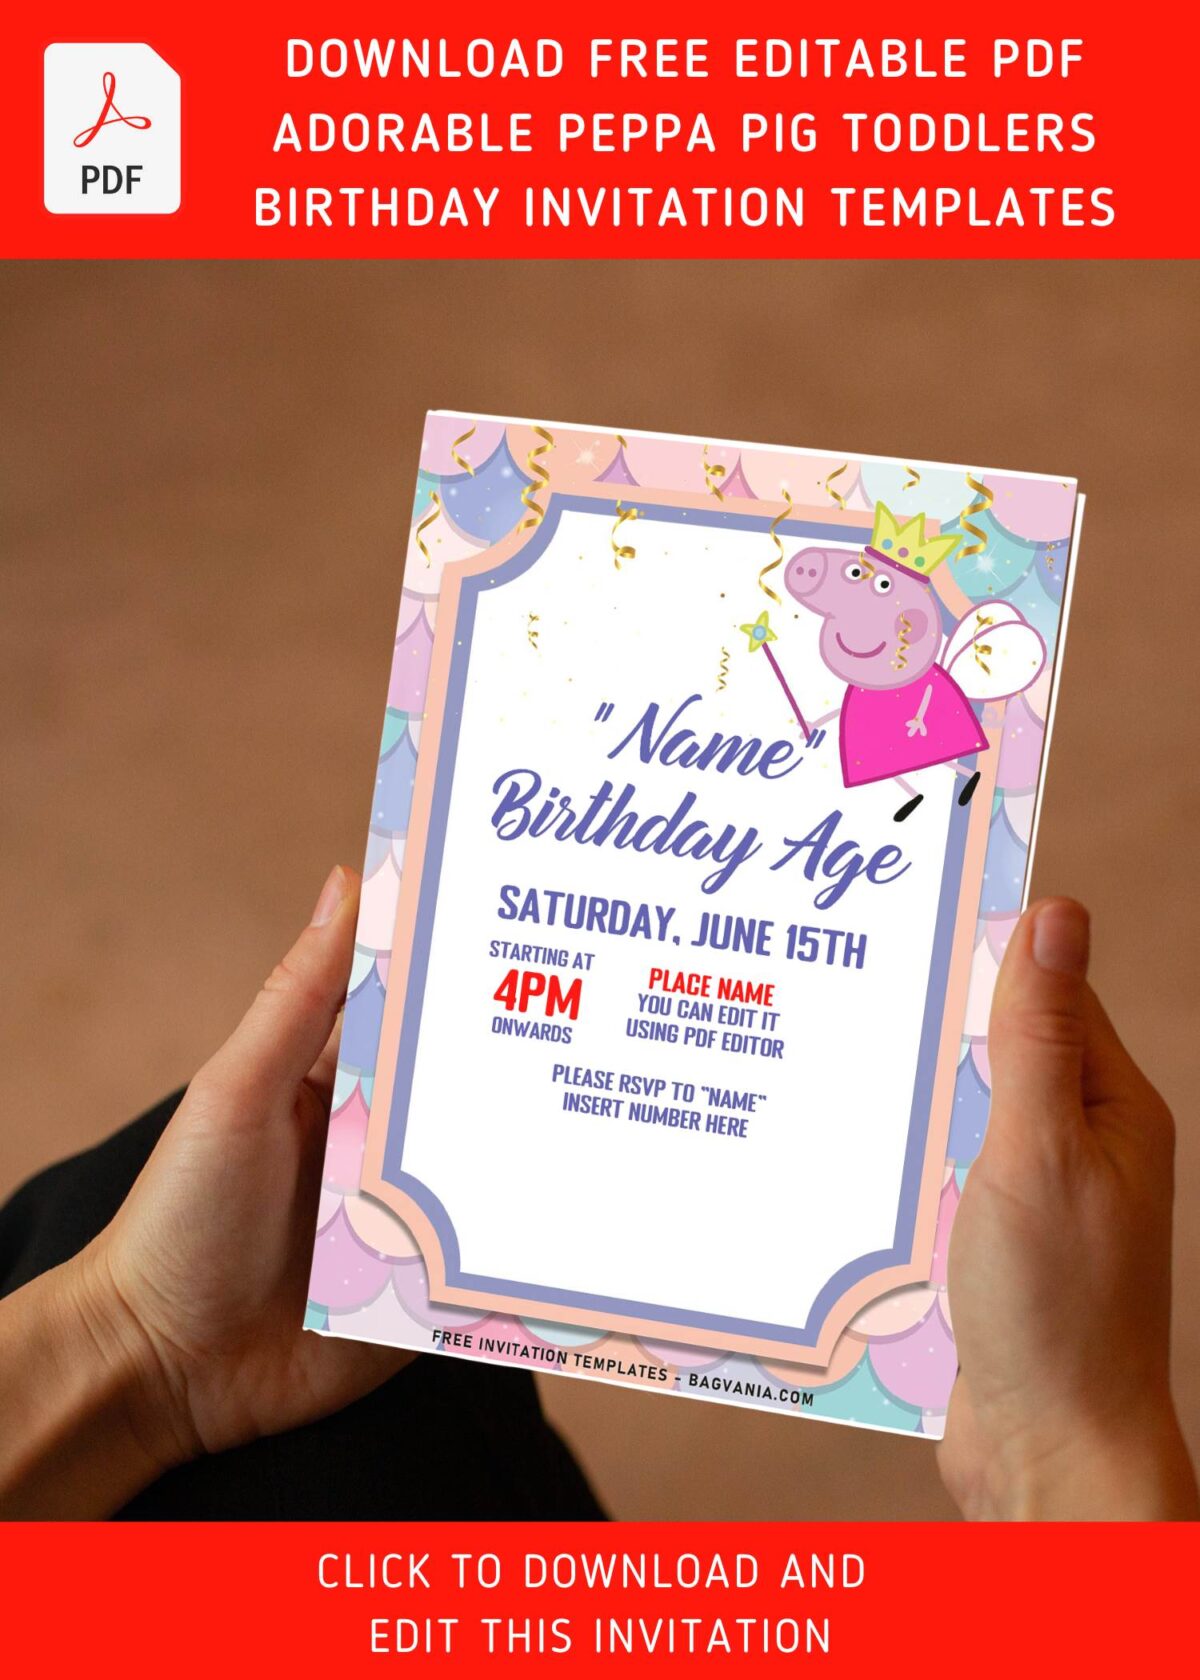 (Free Editable PDF) Peppa Pig Party Time Birthday Invitation Templates with bunting flags